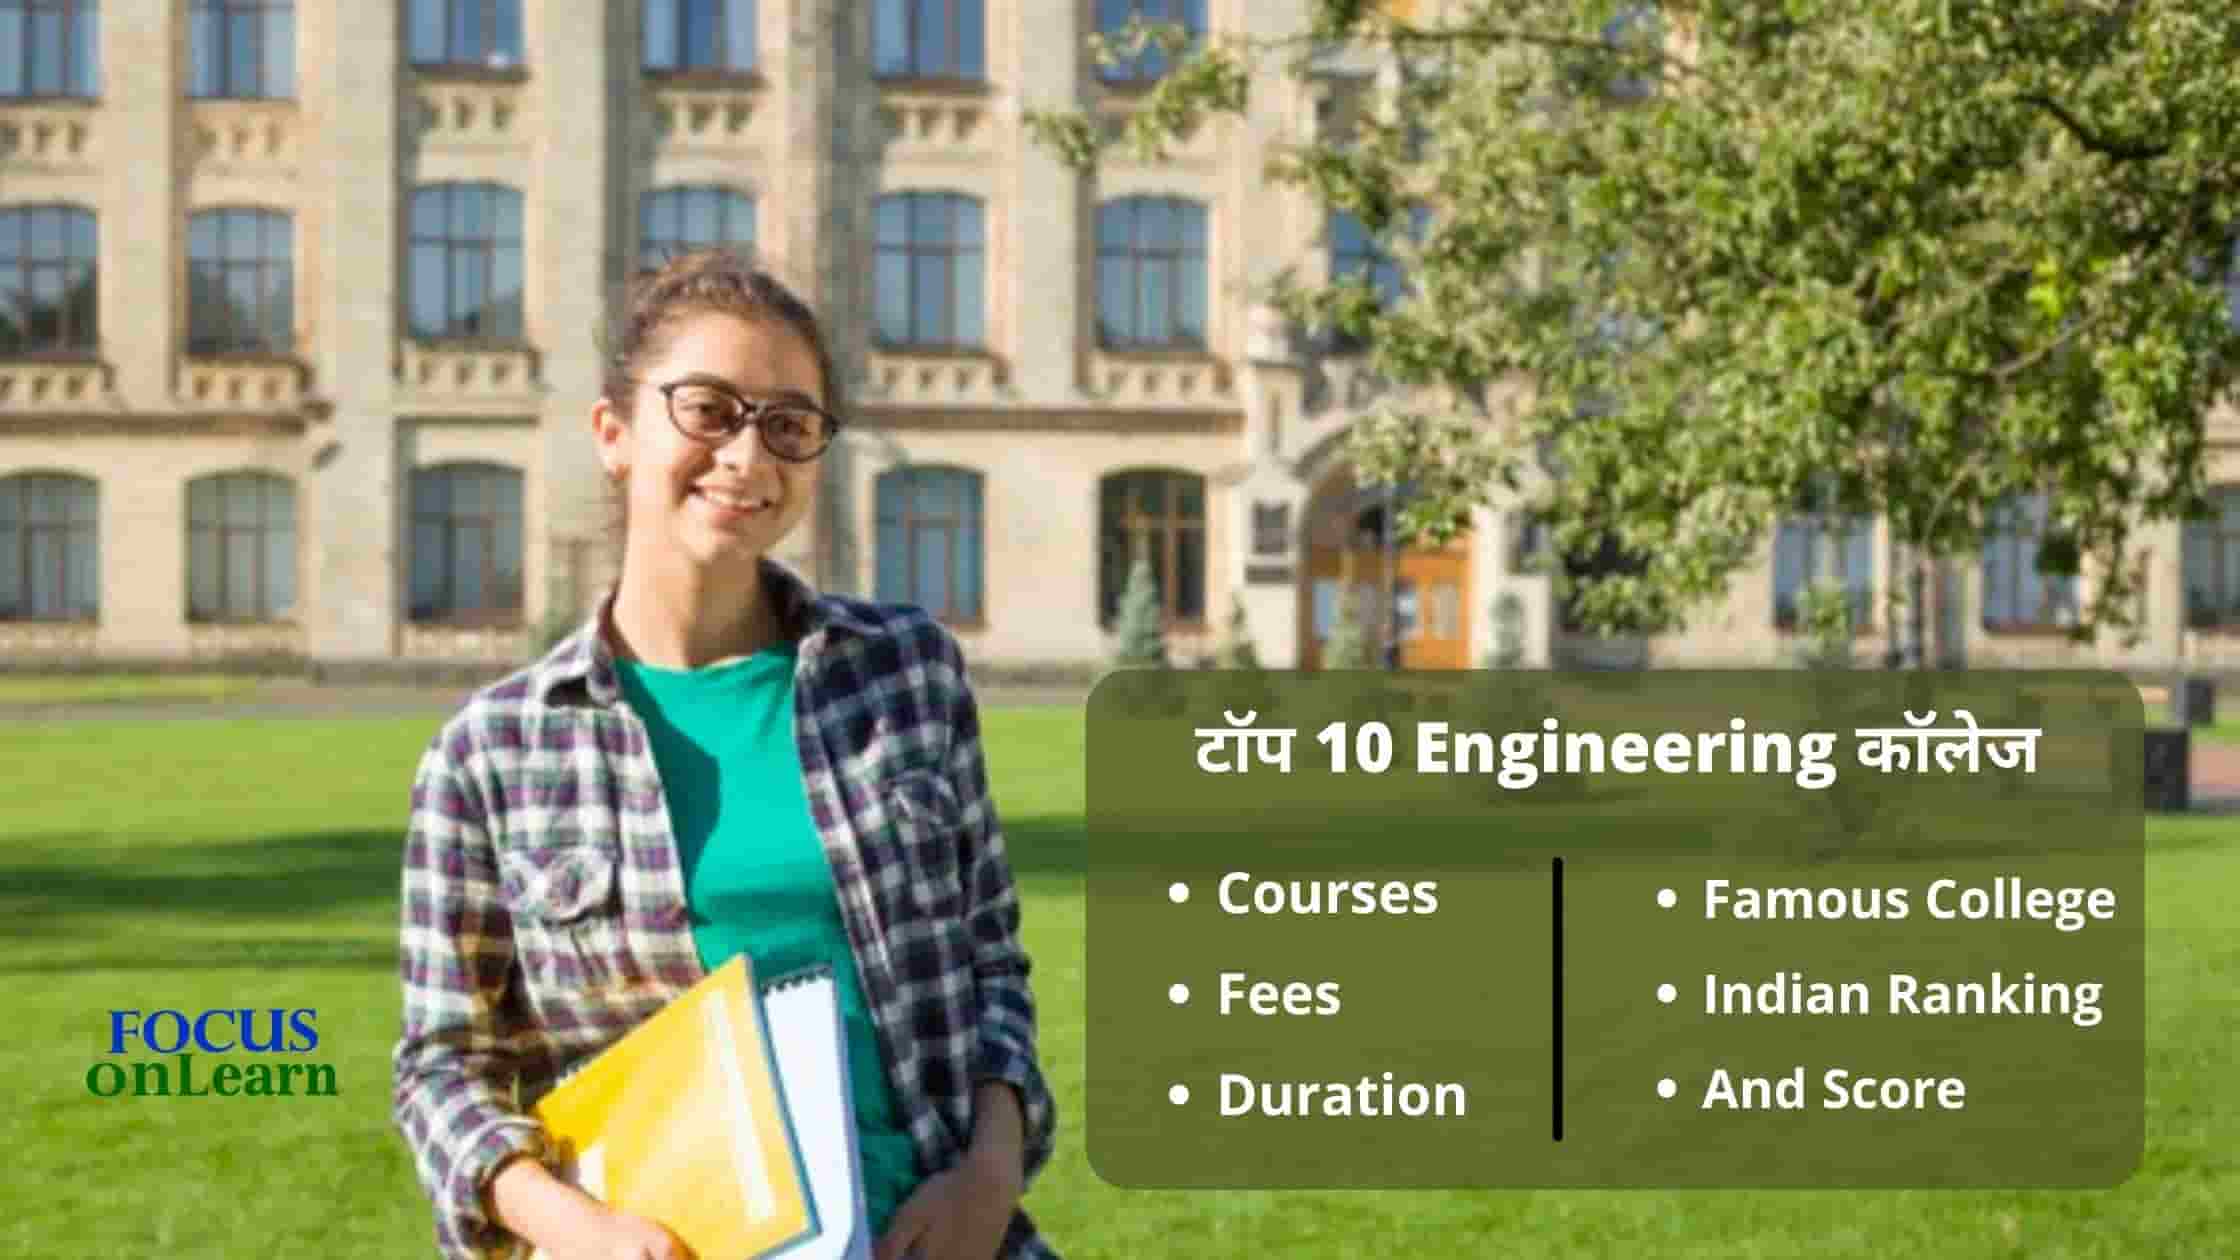 Top Engineering colleges in India